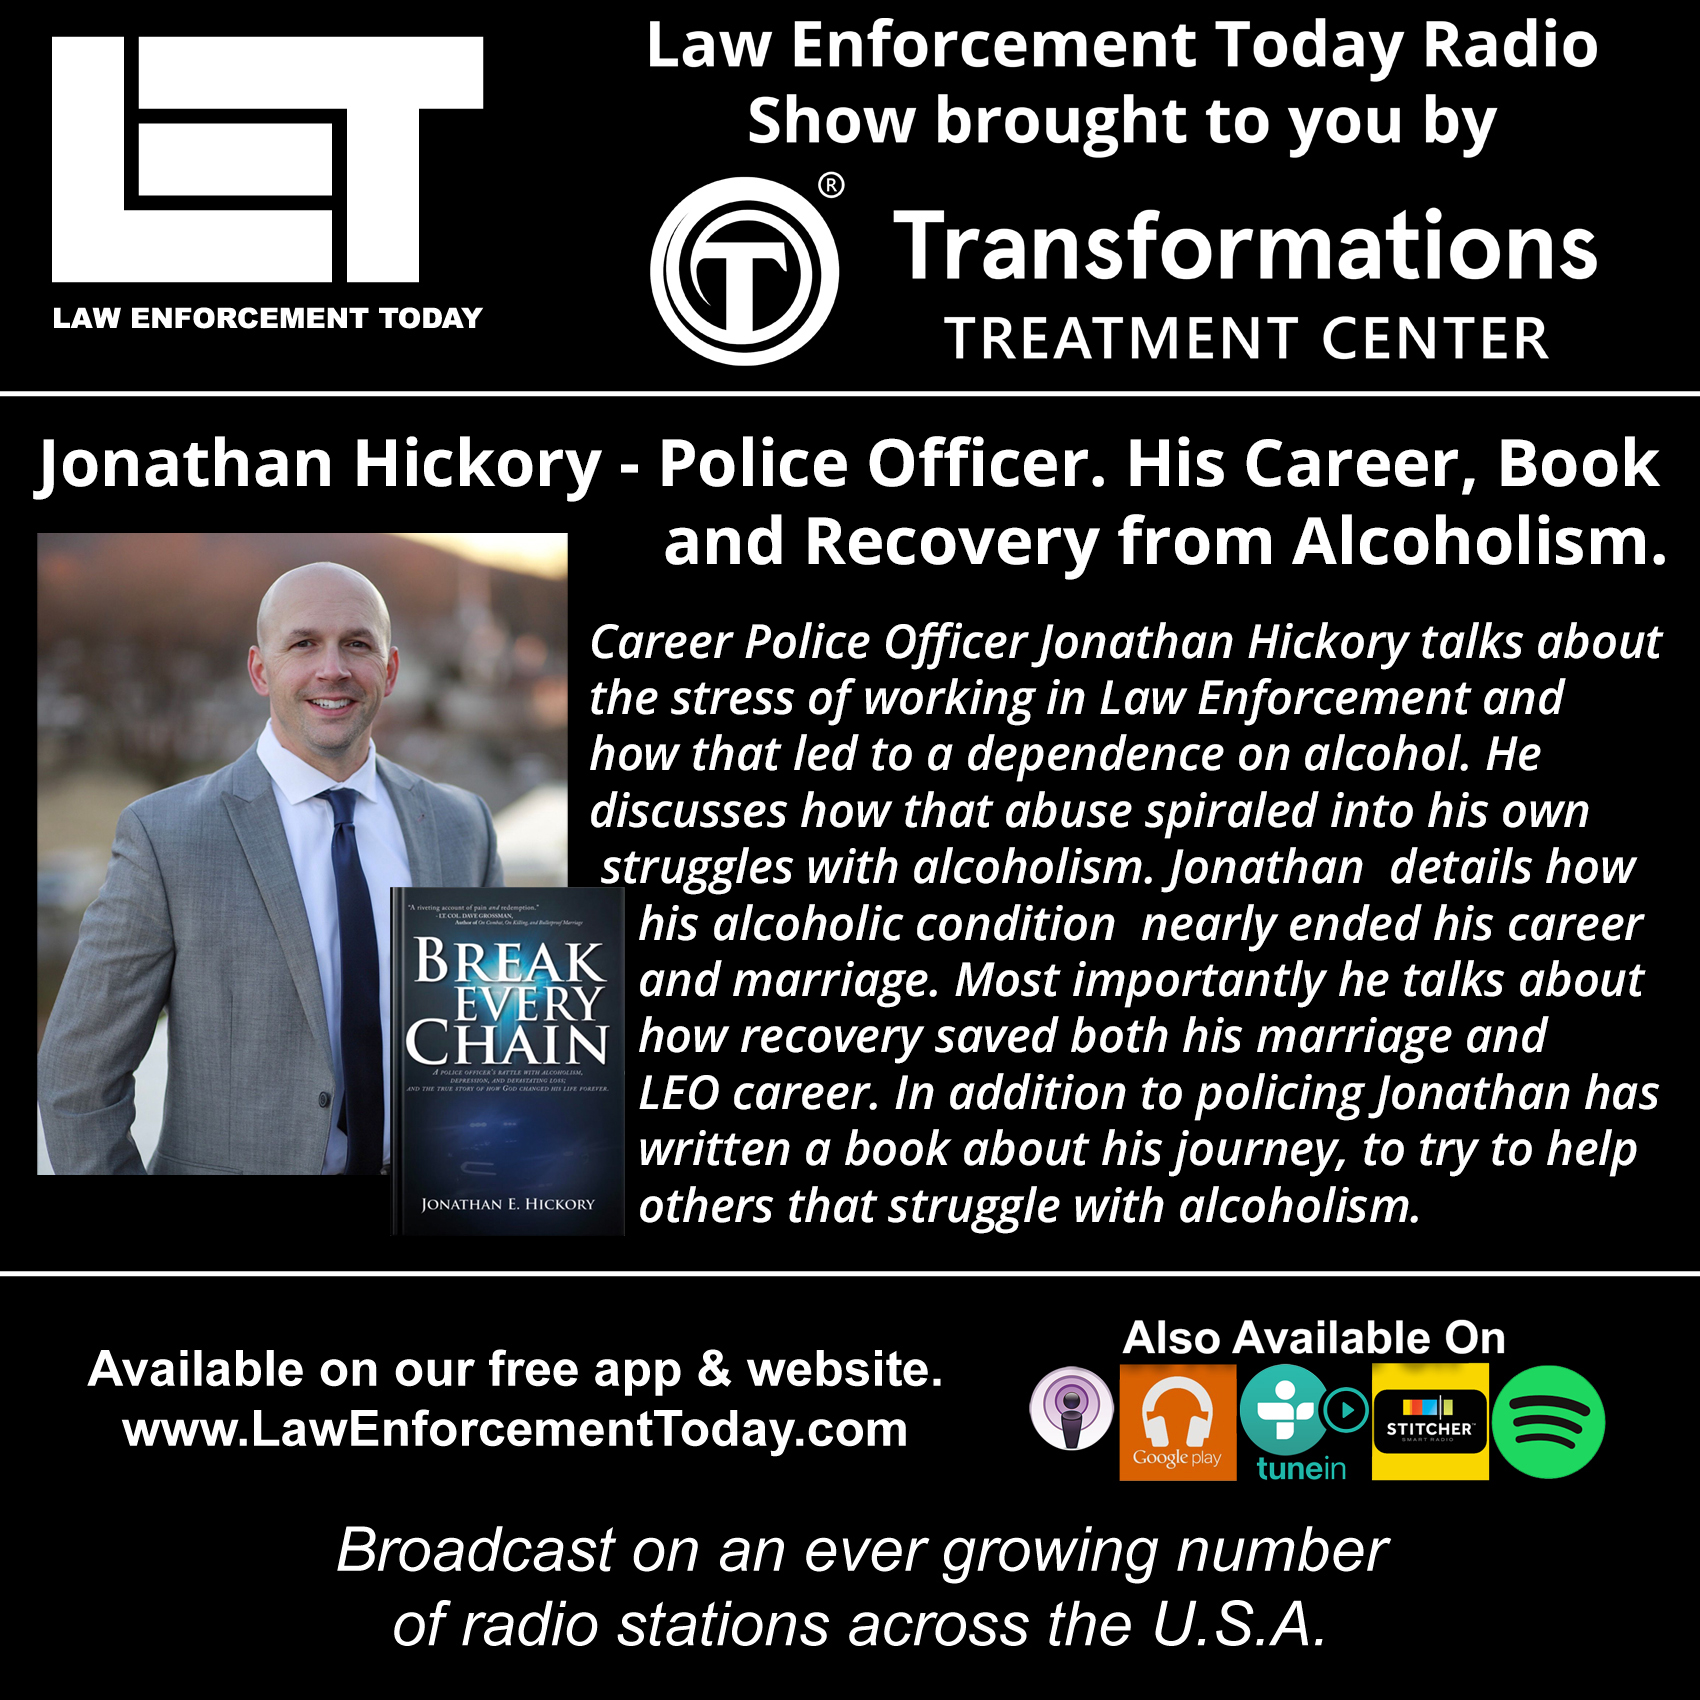 S3E17: Jonathan Hickory - Police Officer, His Career, Book and Recovery From Alcoholism